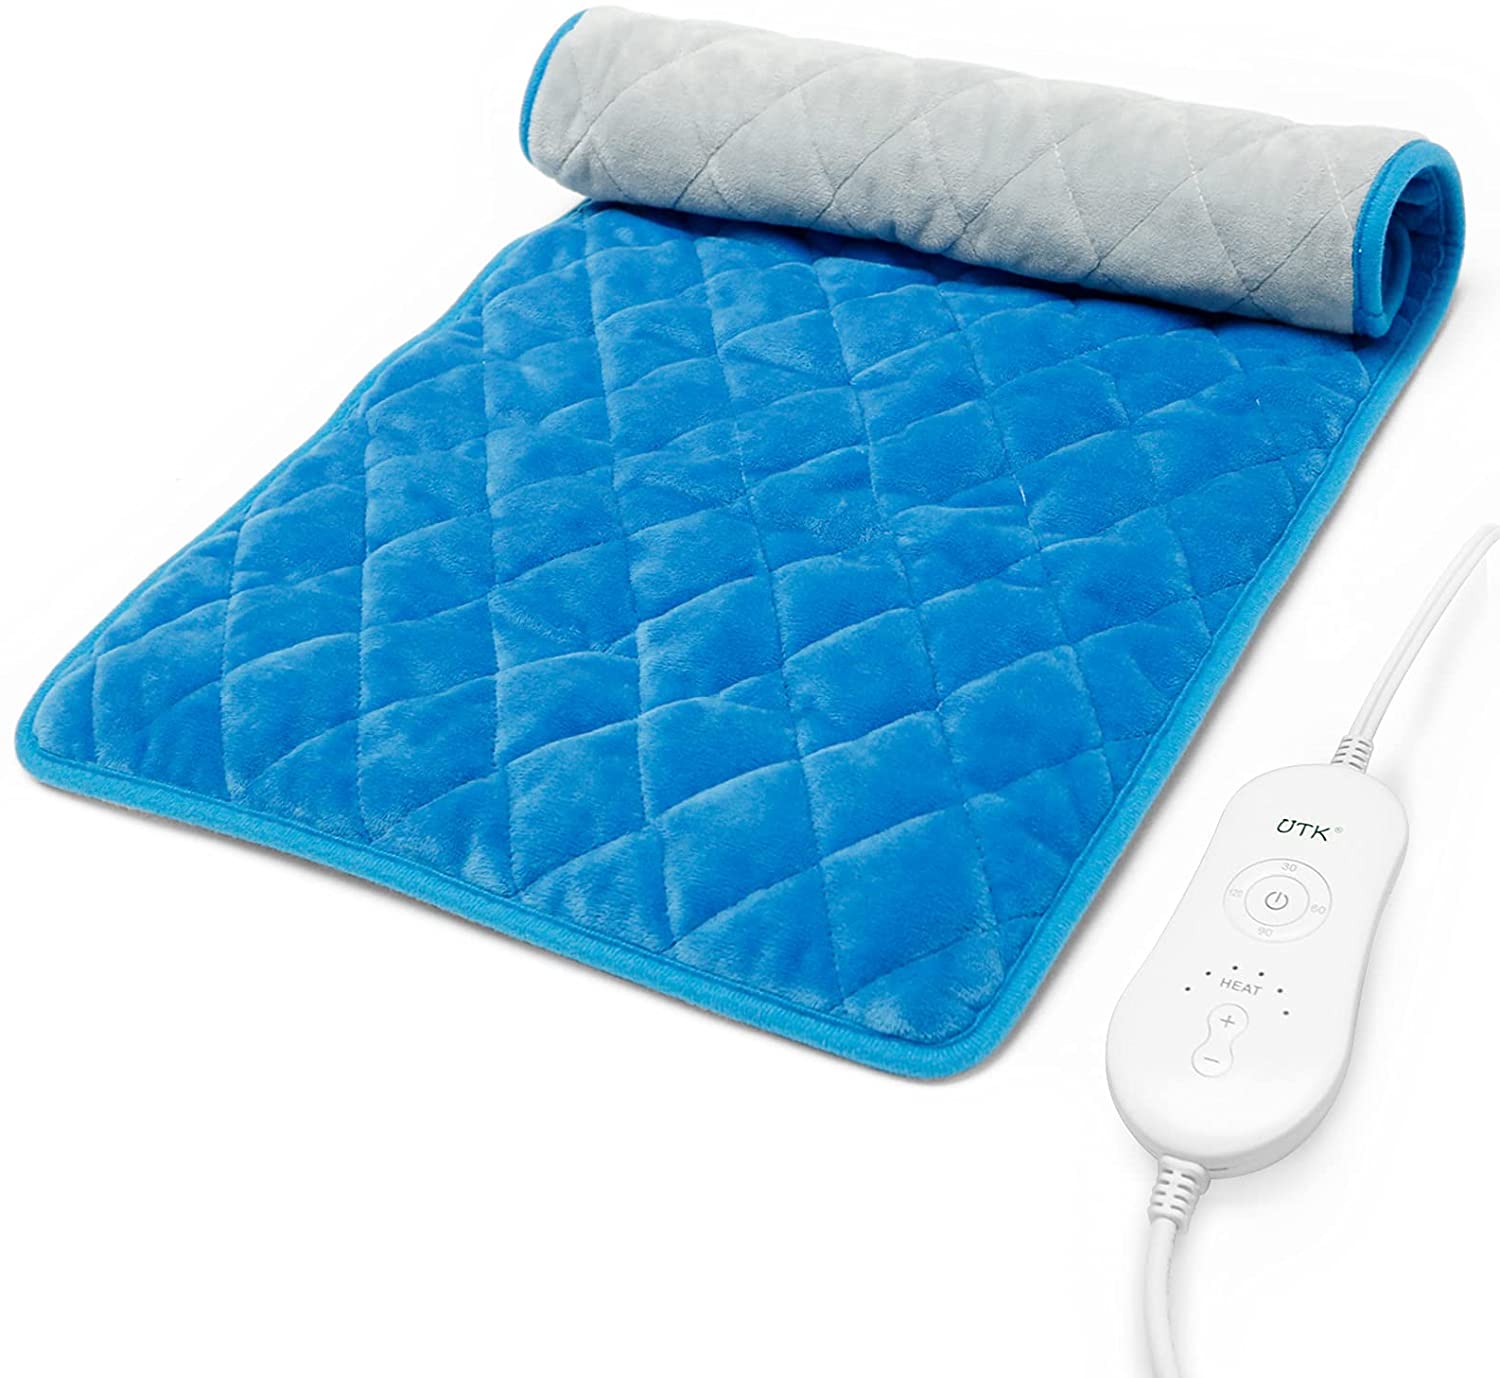 Why Do Infrared Heating Pads? 1